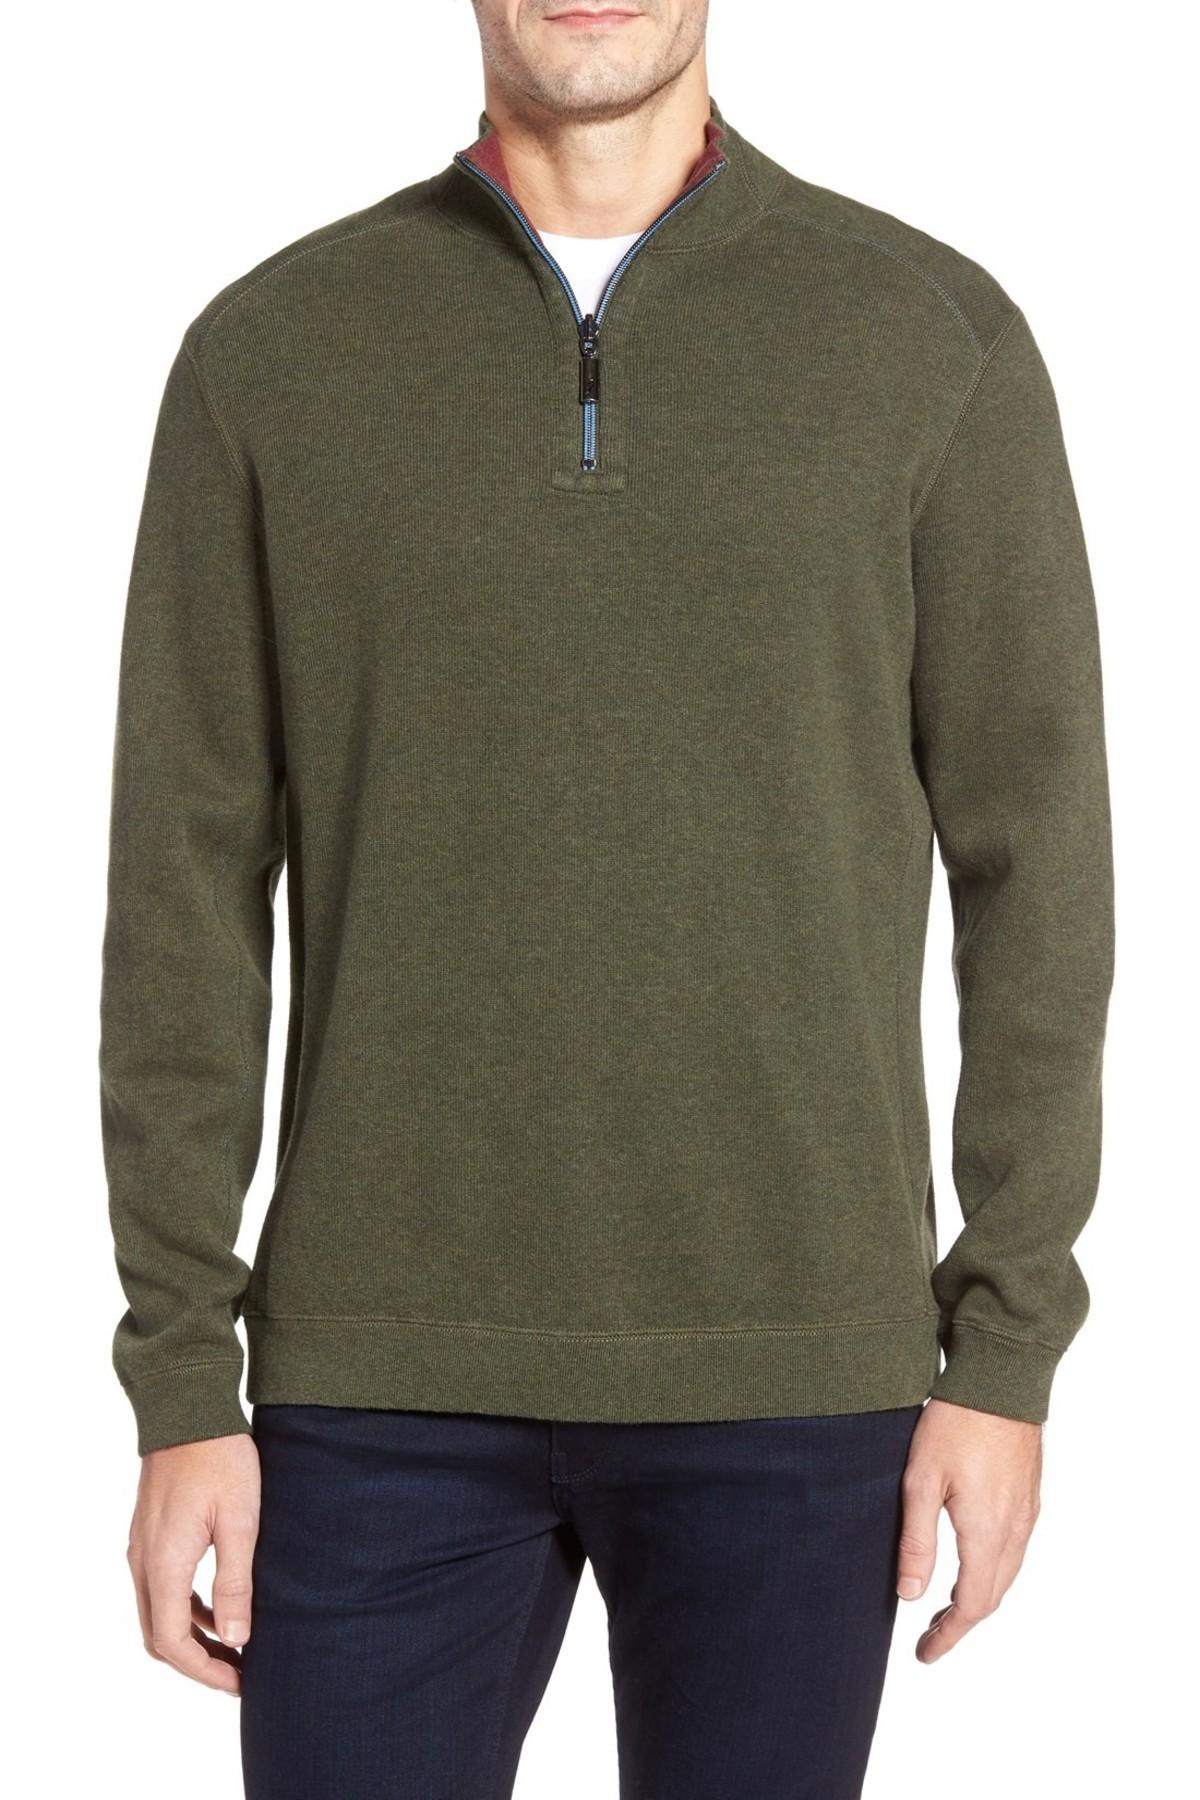 Tommy bahama Flip Side Reversible Quarter Zip Twill Pullover in Green ...